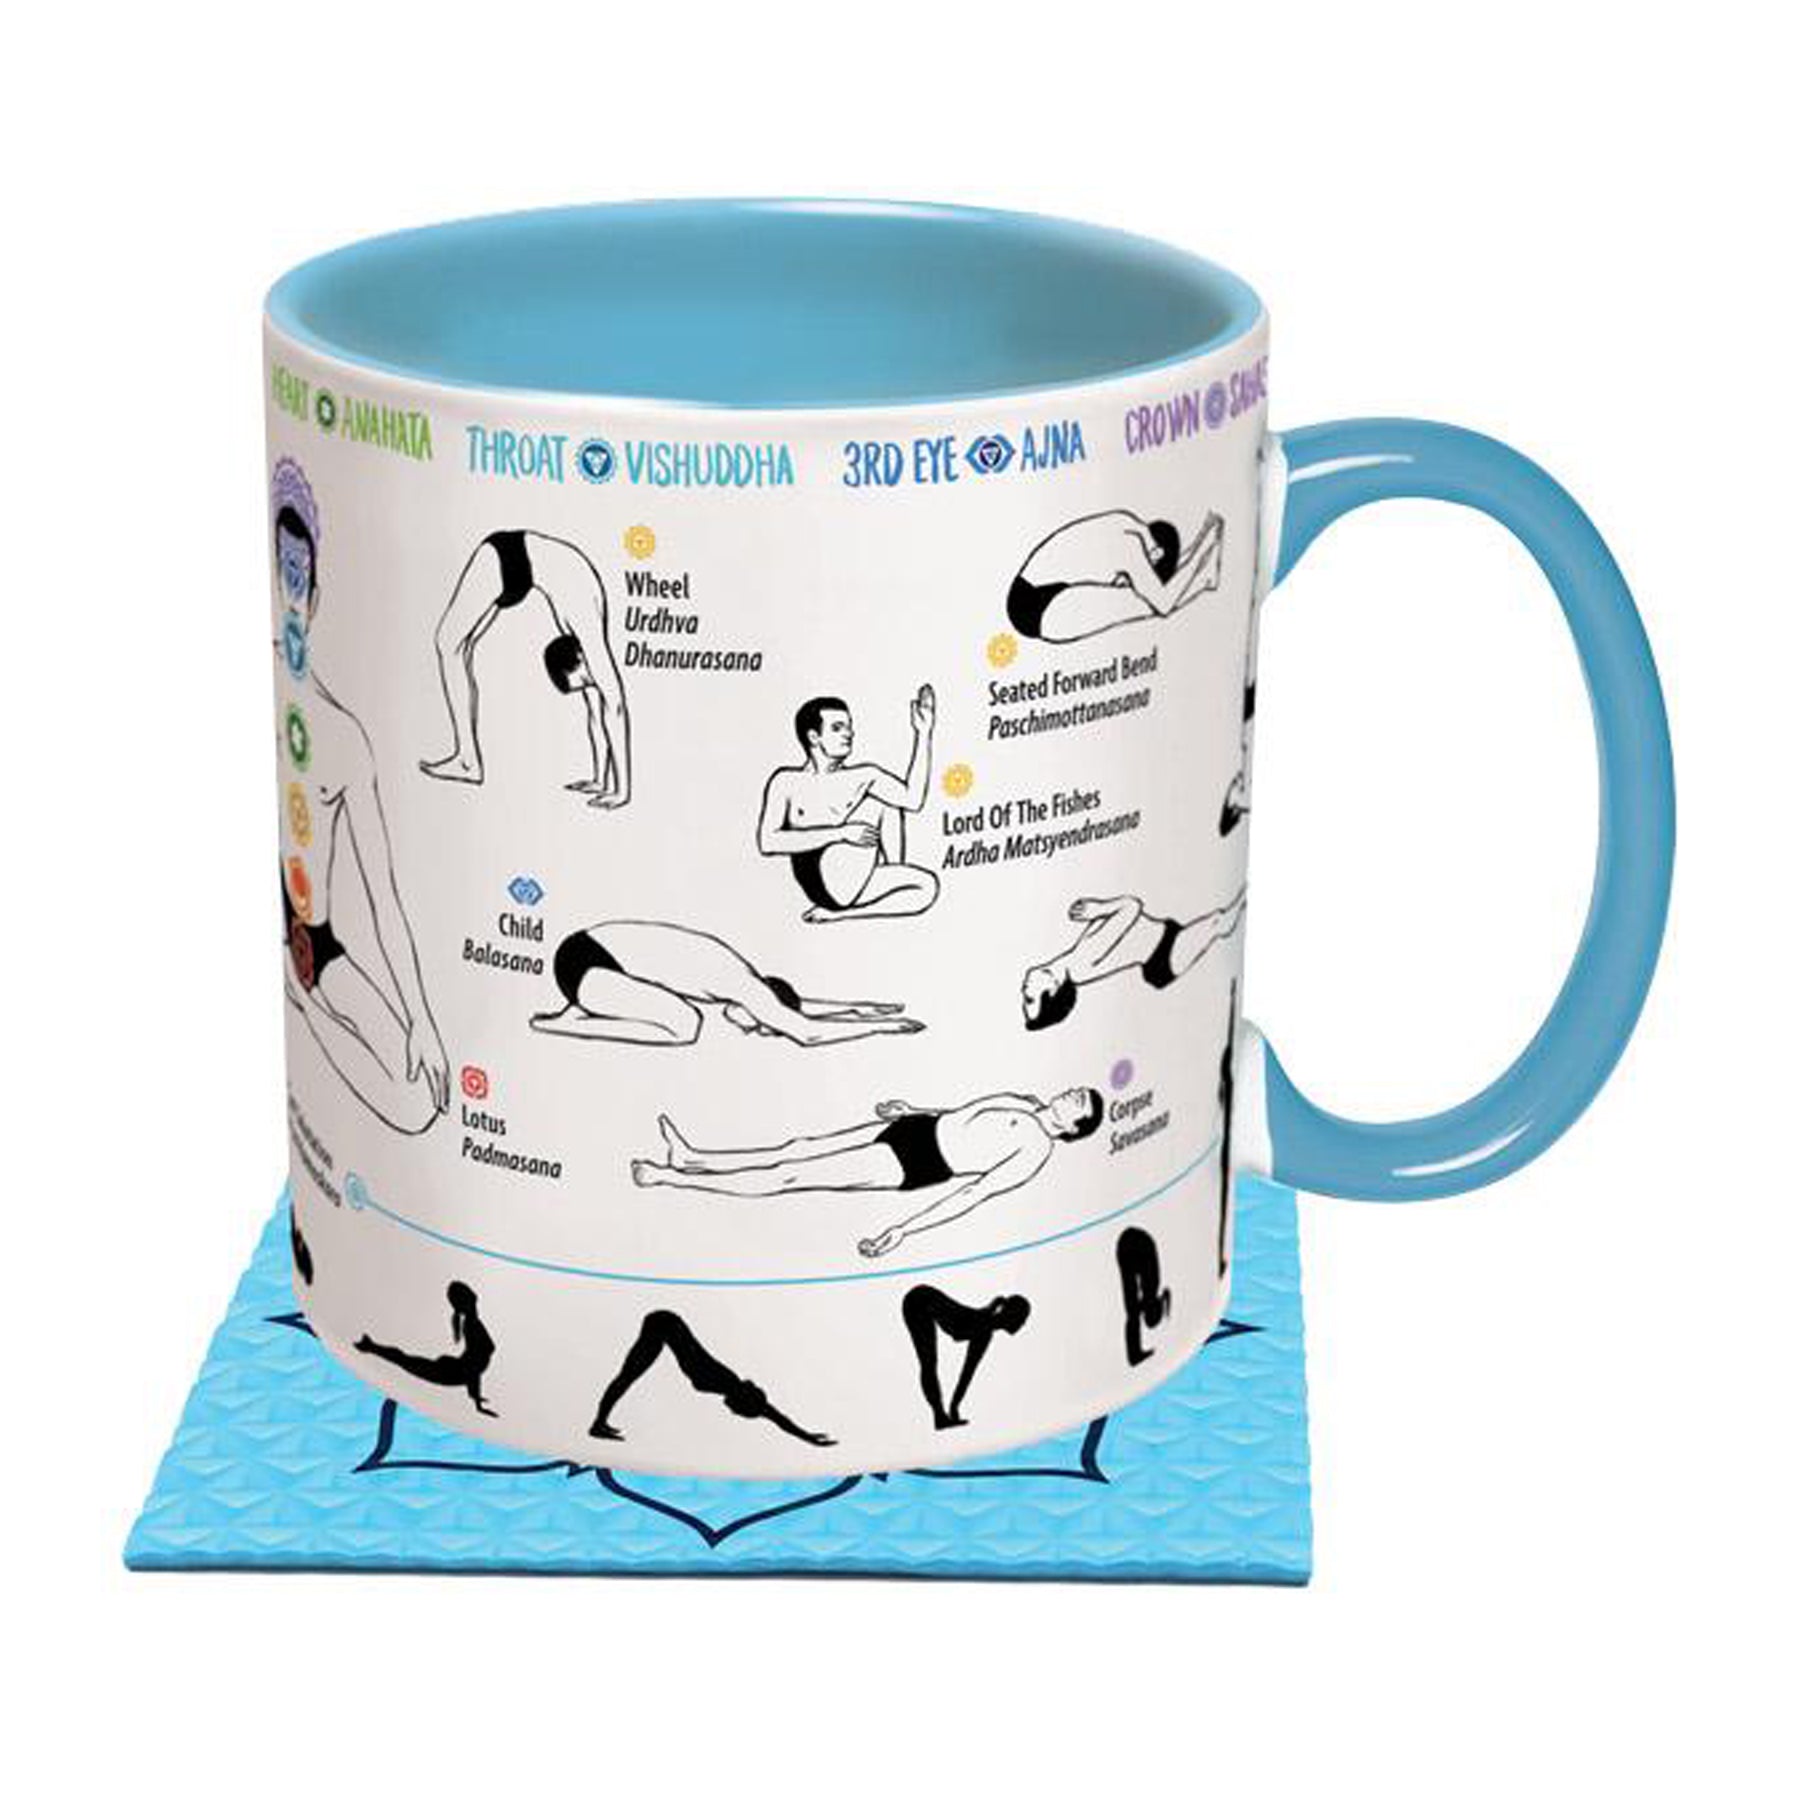 Dropship Yoga Theme - Mindful Or Mind Full Mug to Sell Online at a